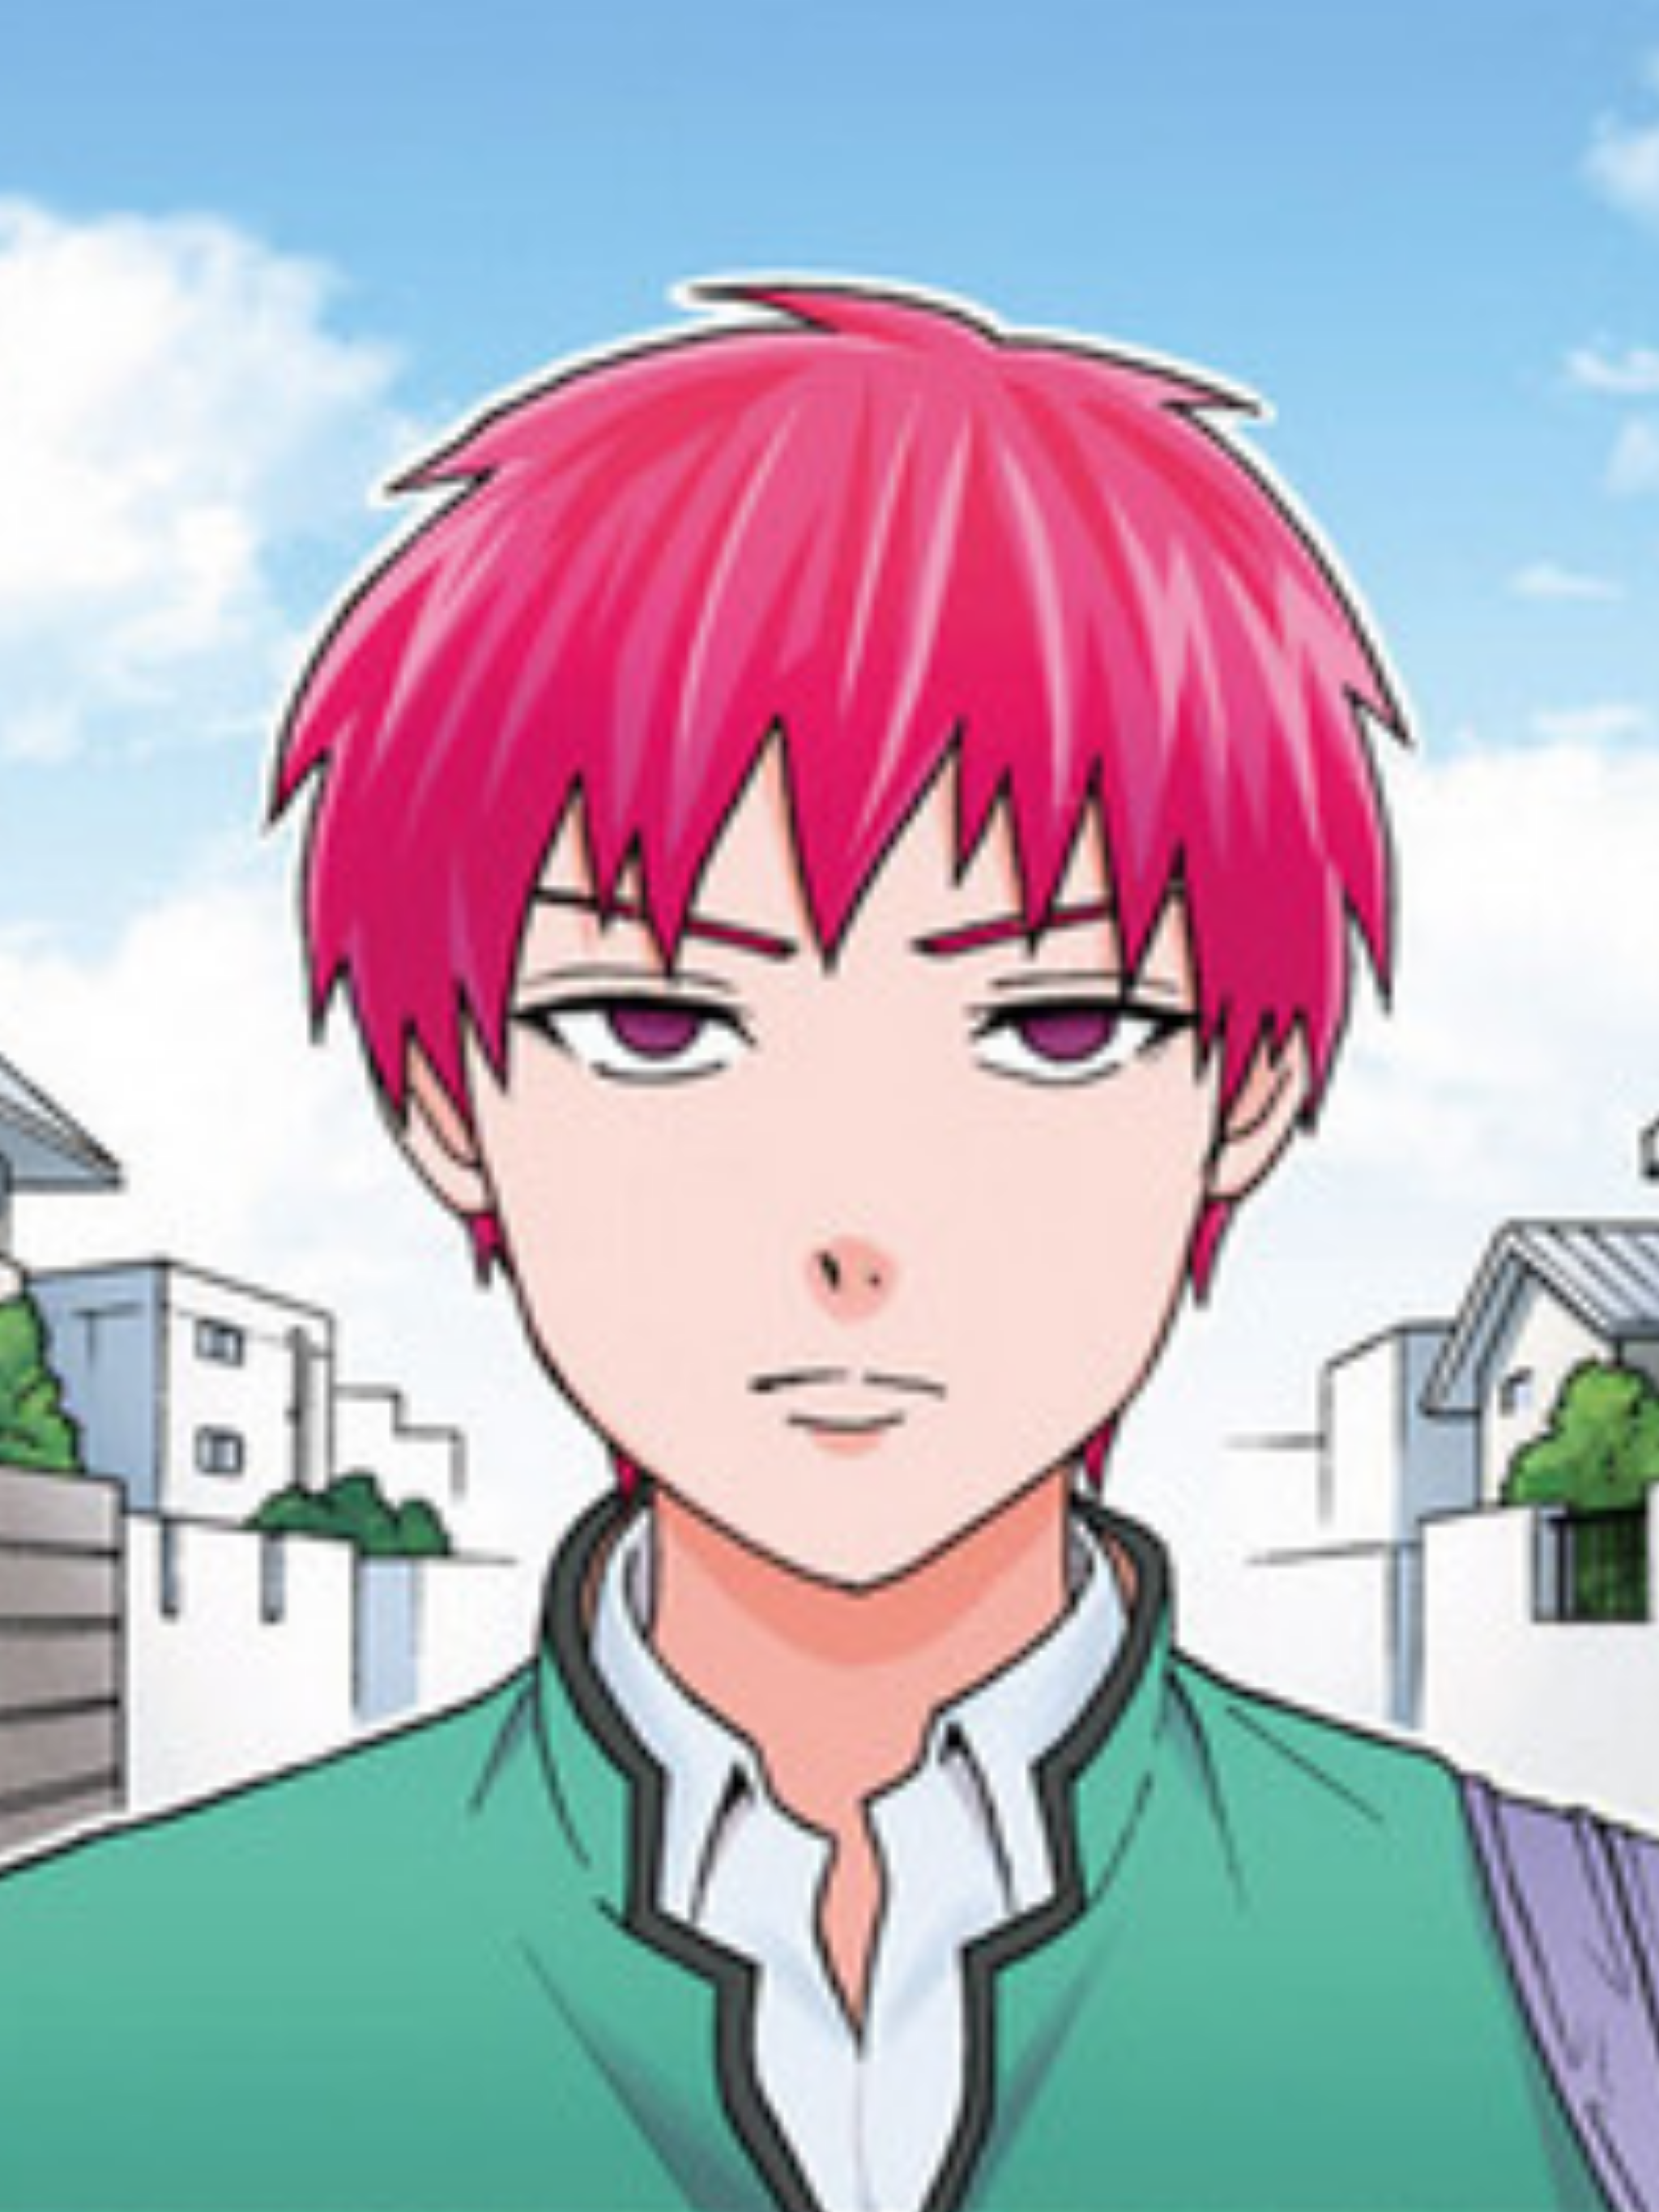 Download Saiki Kusuo with his psychic powers in the anime 